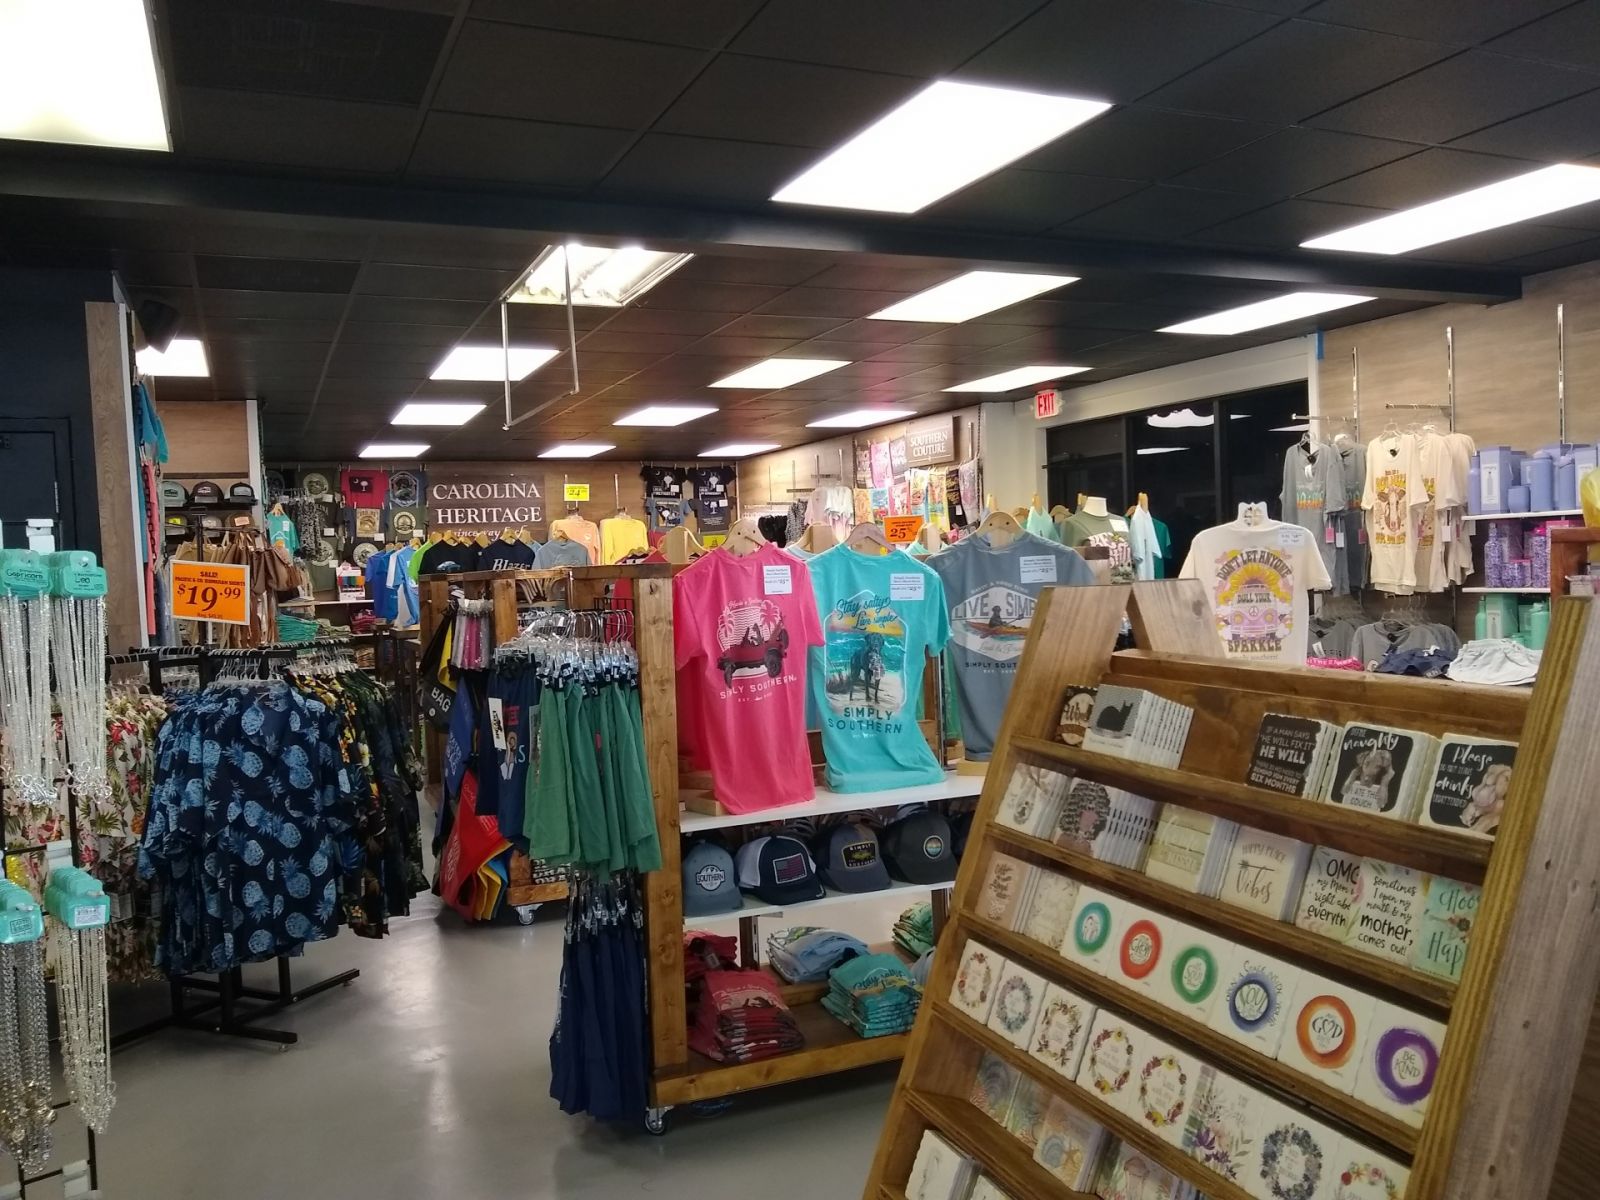 Lyons' General Store carries clothing, accessories, gifts and more. (Photo/Christina Lee Knauss)